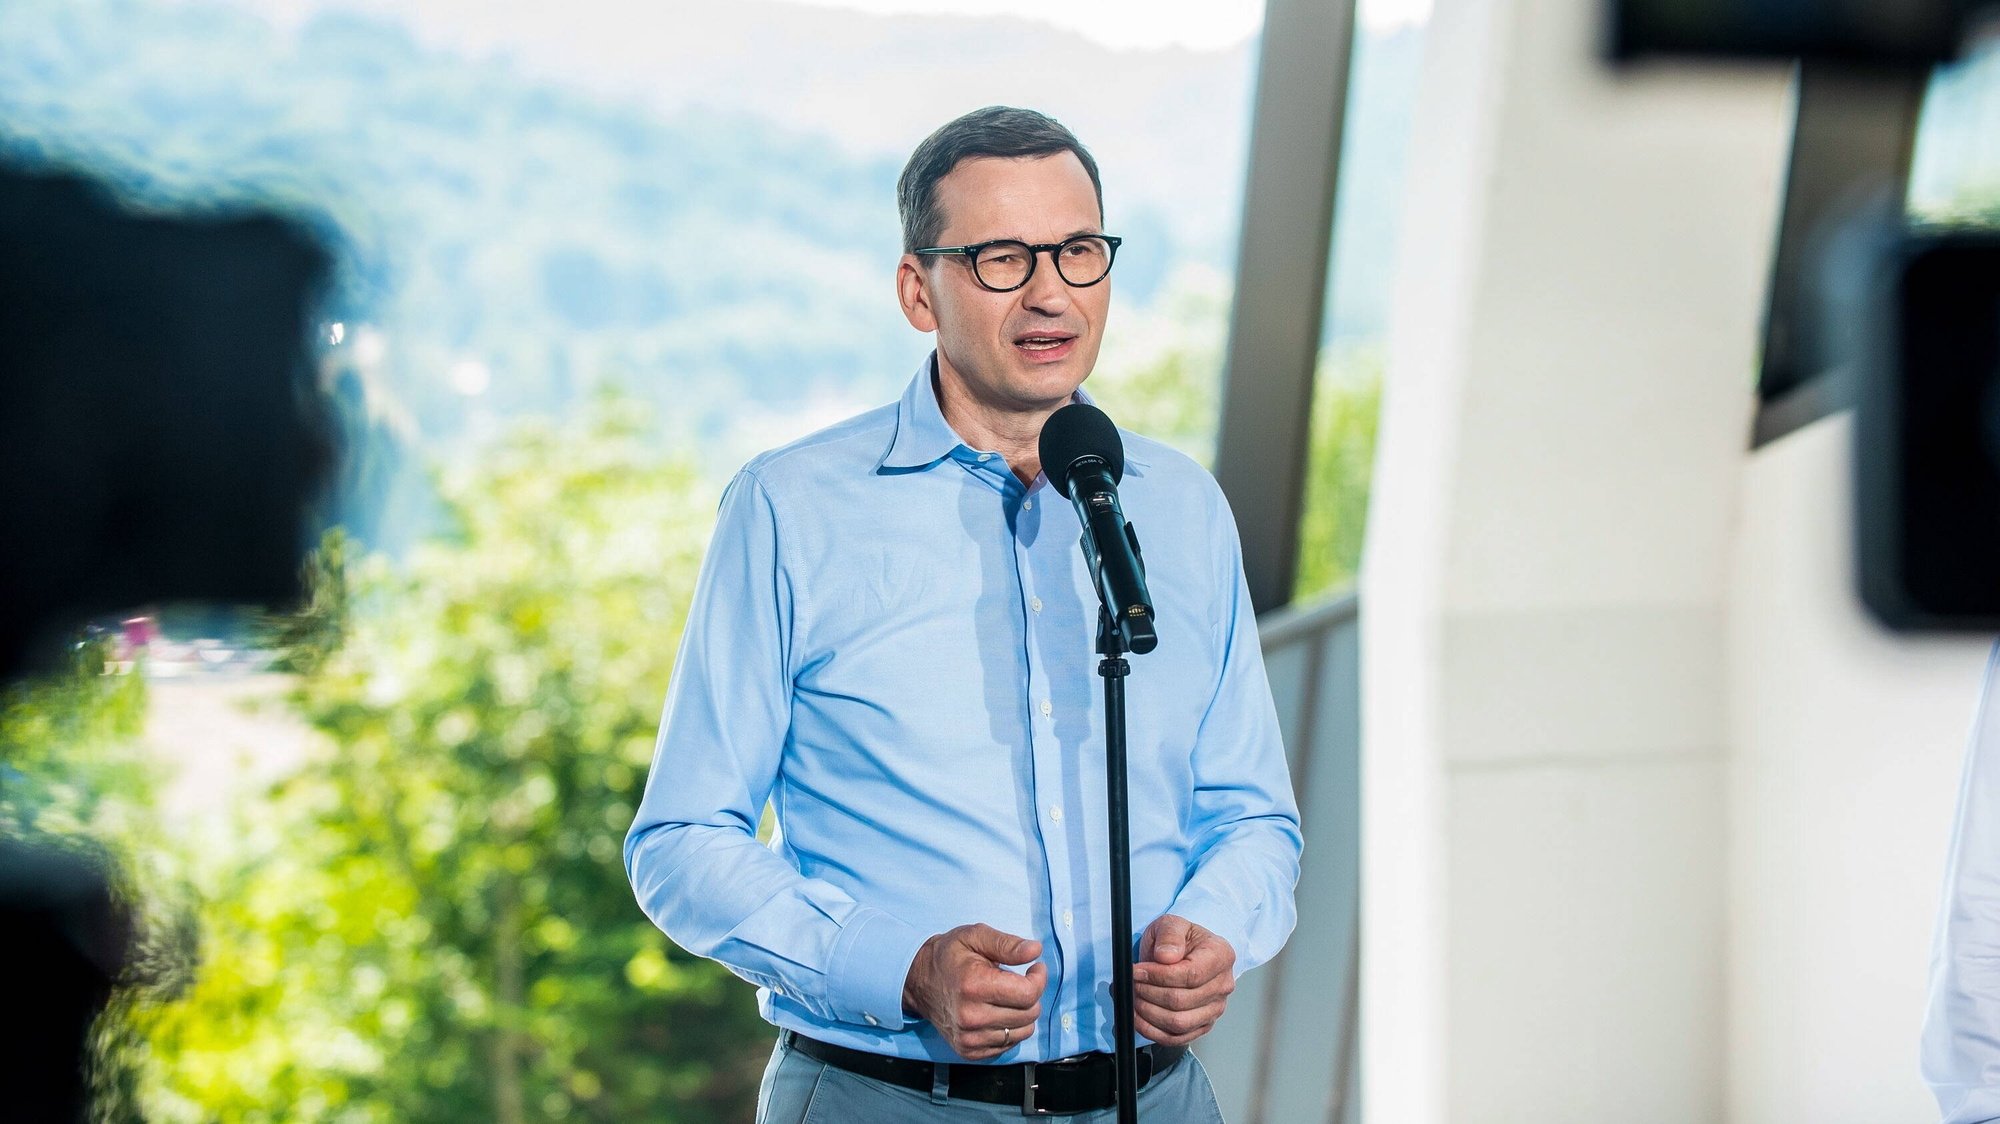 epa10046099 Polish Prime Minister Mateusz Morawiecki speaks during the opening of the gondola lift in Solina, Poland, 01 July 2022. The length of the cable railway is 1600 meters, from the Plasza station to the Jawor station, where the observation tower and the theme park are situated.  EPA/Art Service 2 POLAND OUT